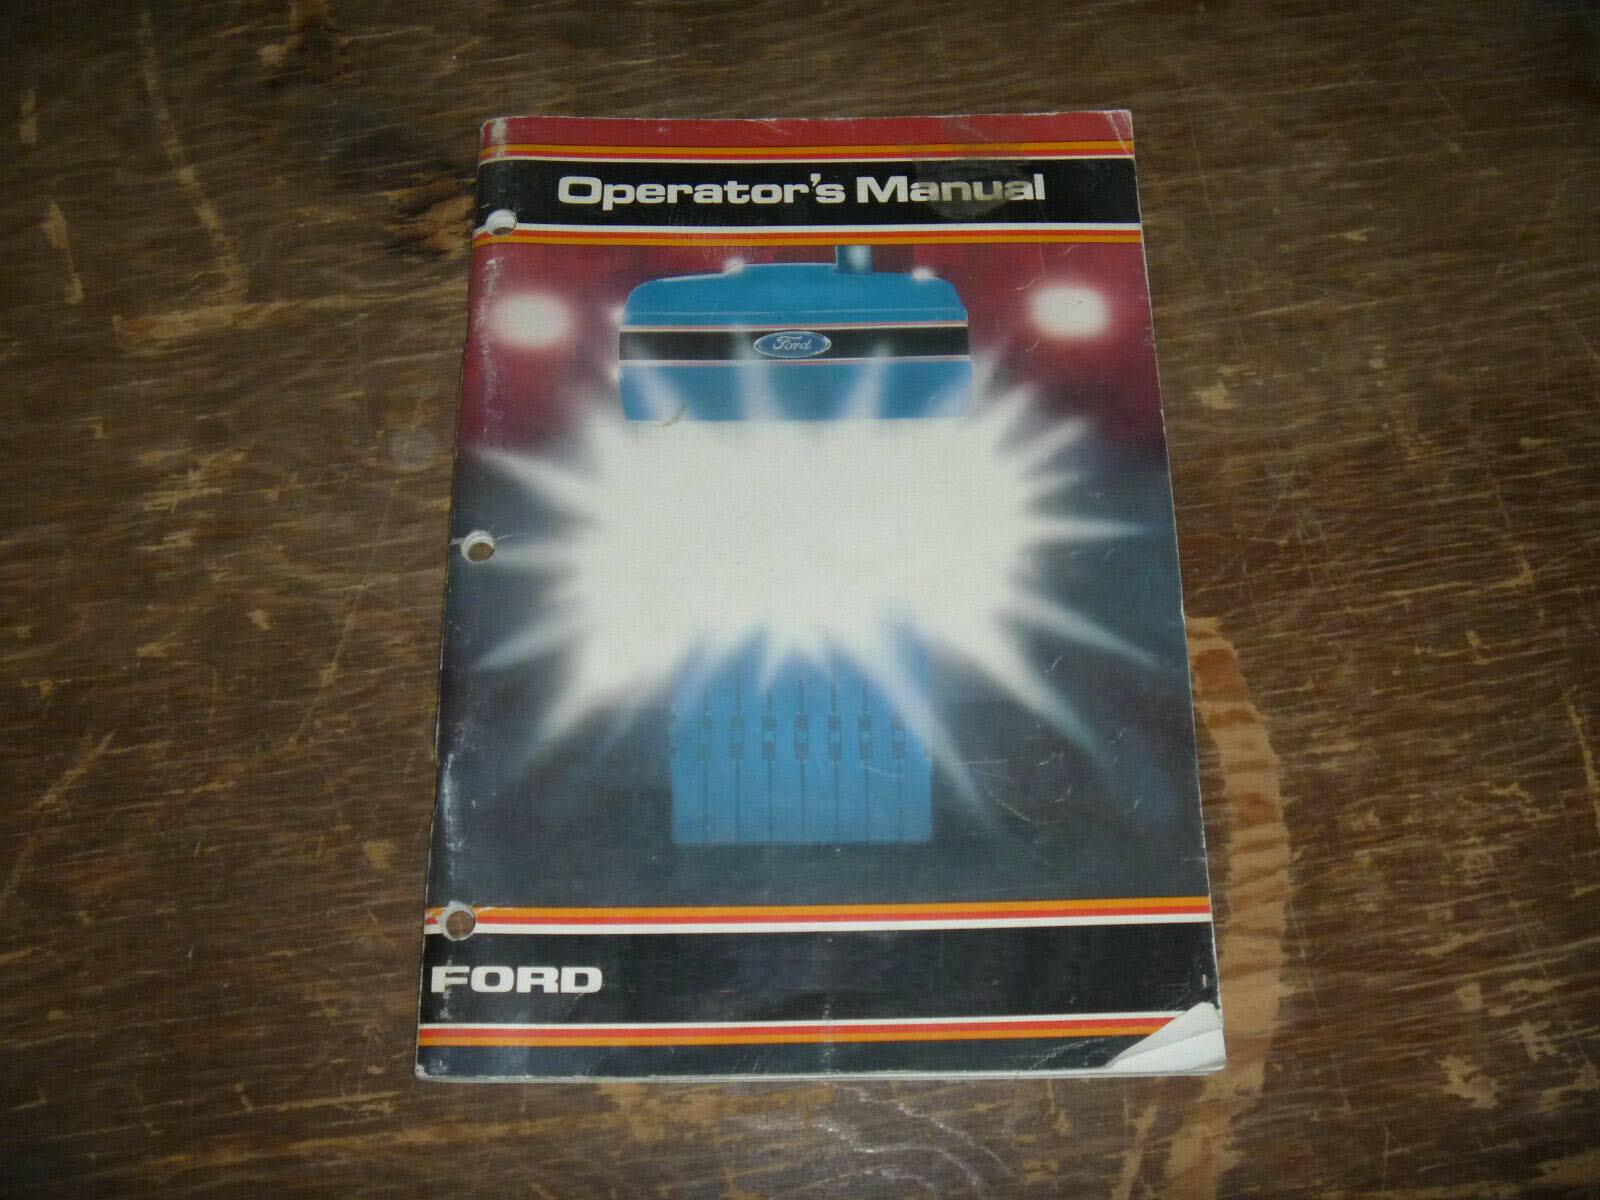 Operator's Manual for FORD Tractors model 12